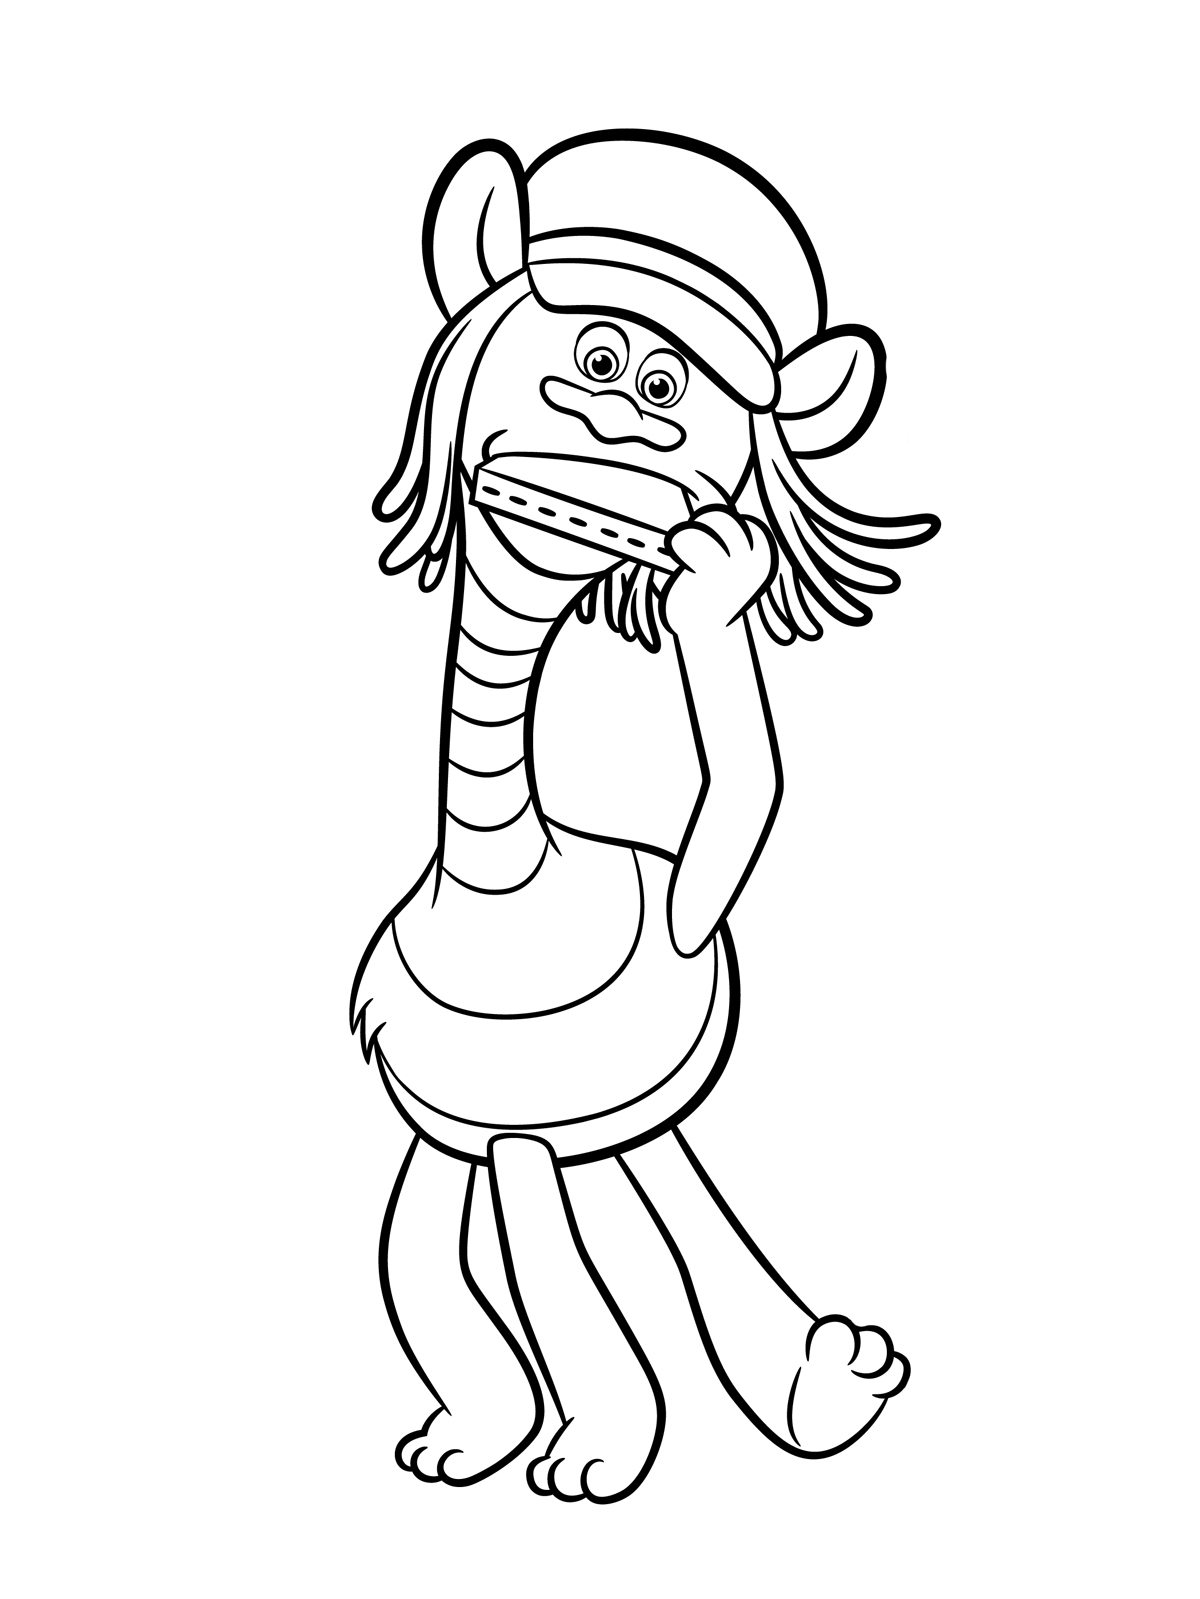 free coloring pages trolls trolls drawing at getdrawings free download pages coloring free trolls 